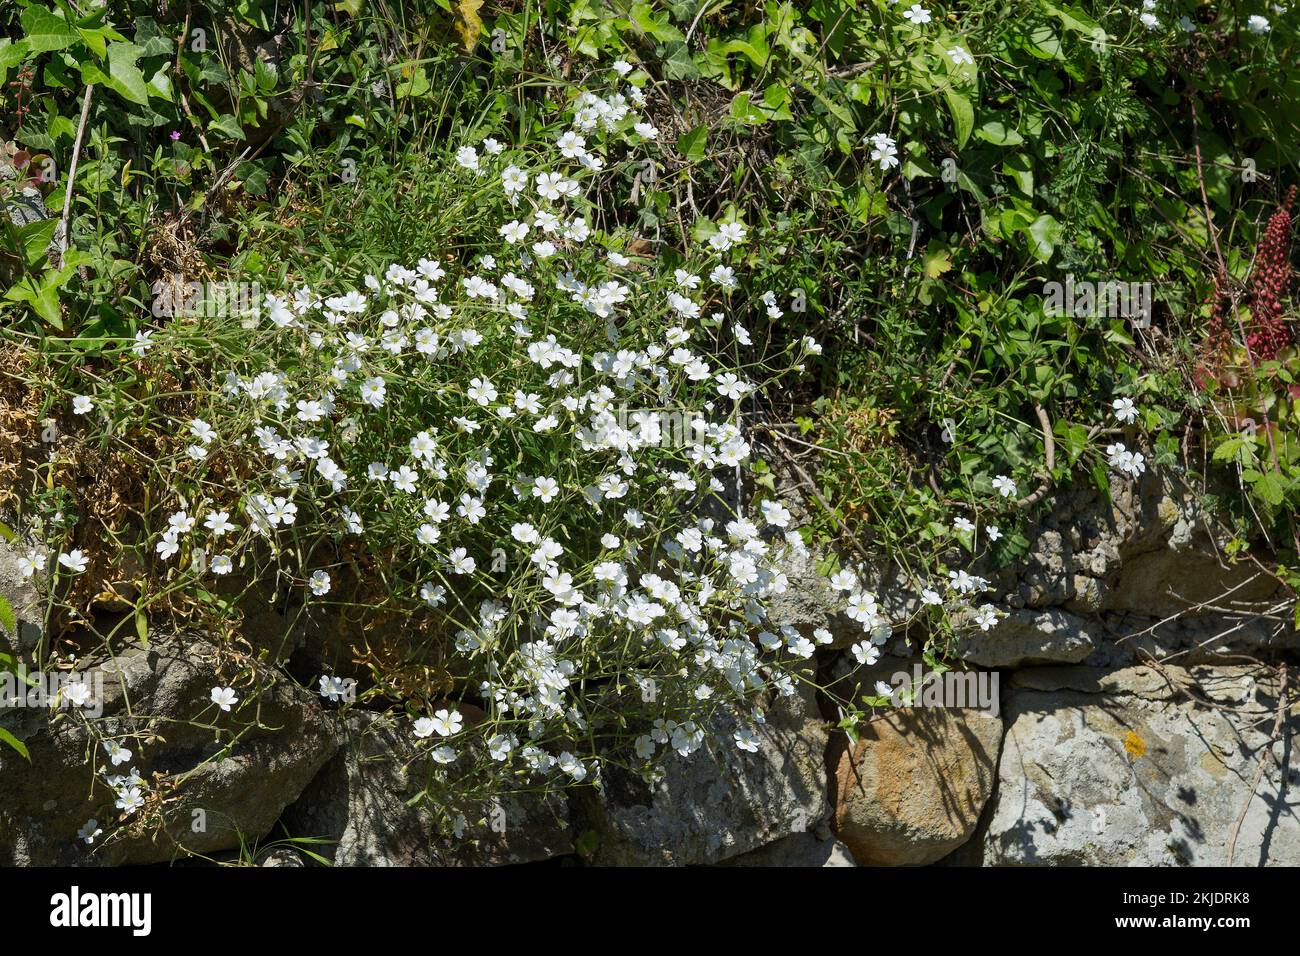 Field mouse-ear (Cerastium arvense). Caryophyllaceae. Small perennial grass. wild plant. white flowers Stock Photo